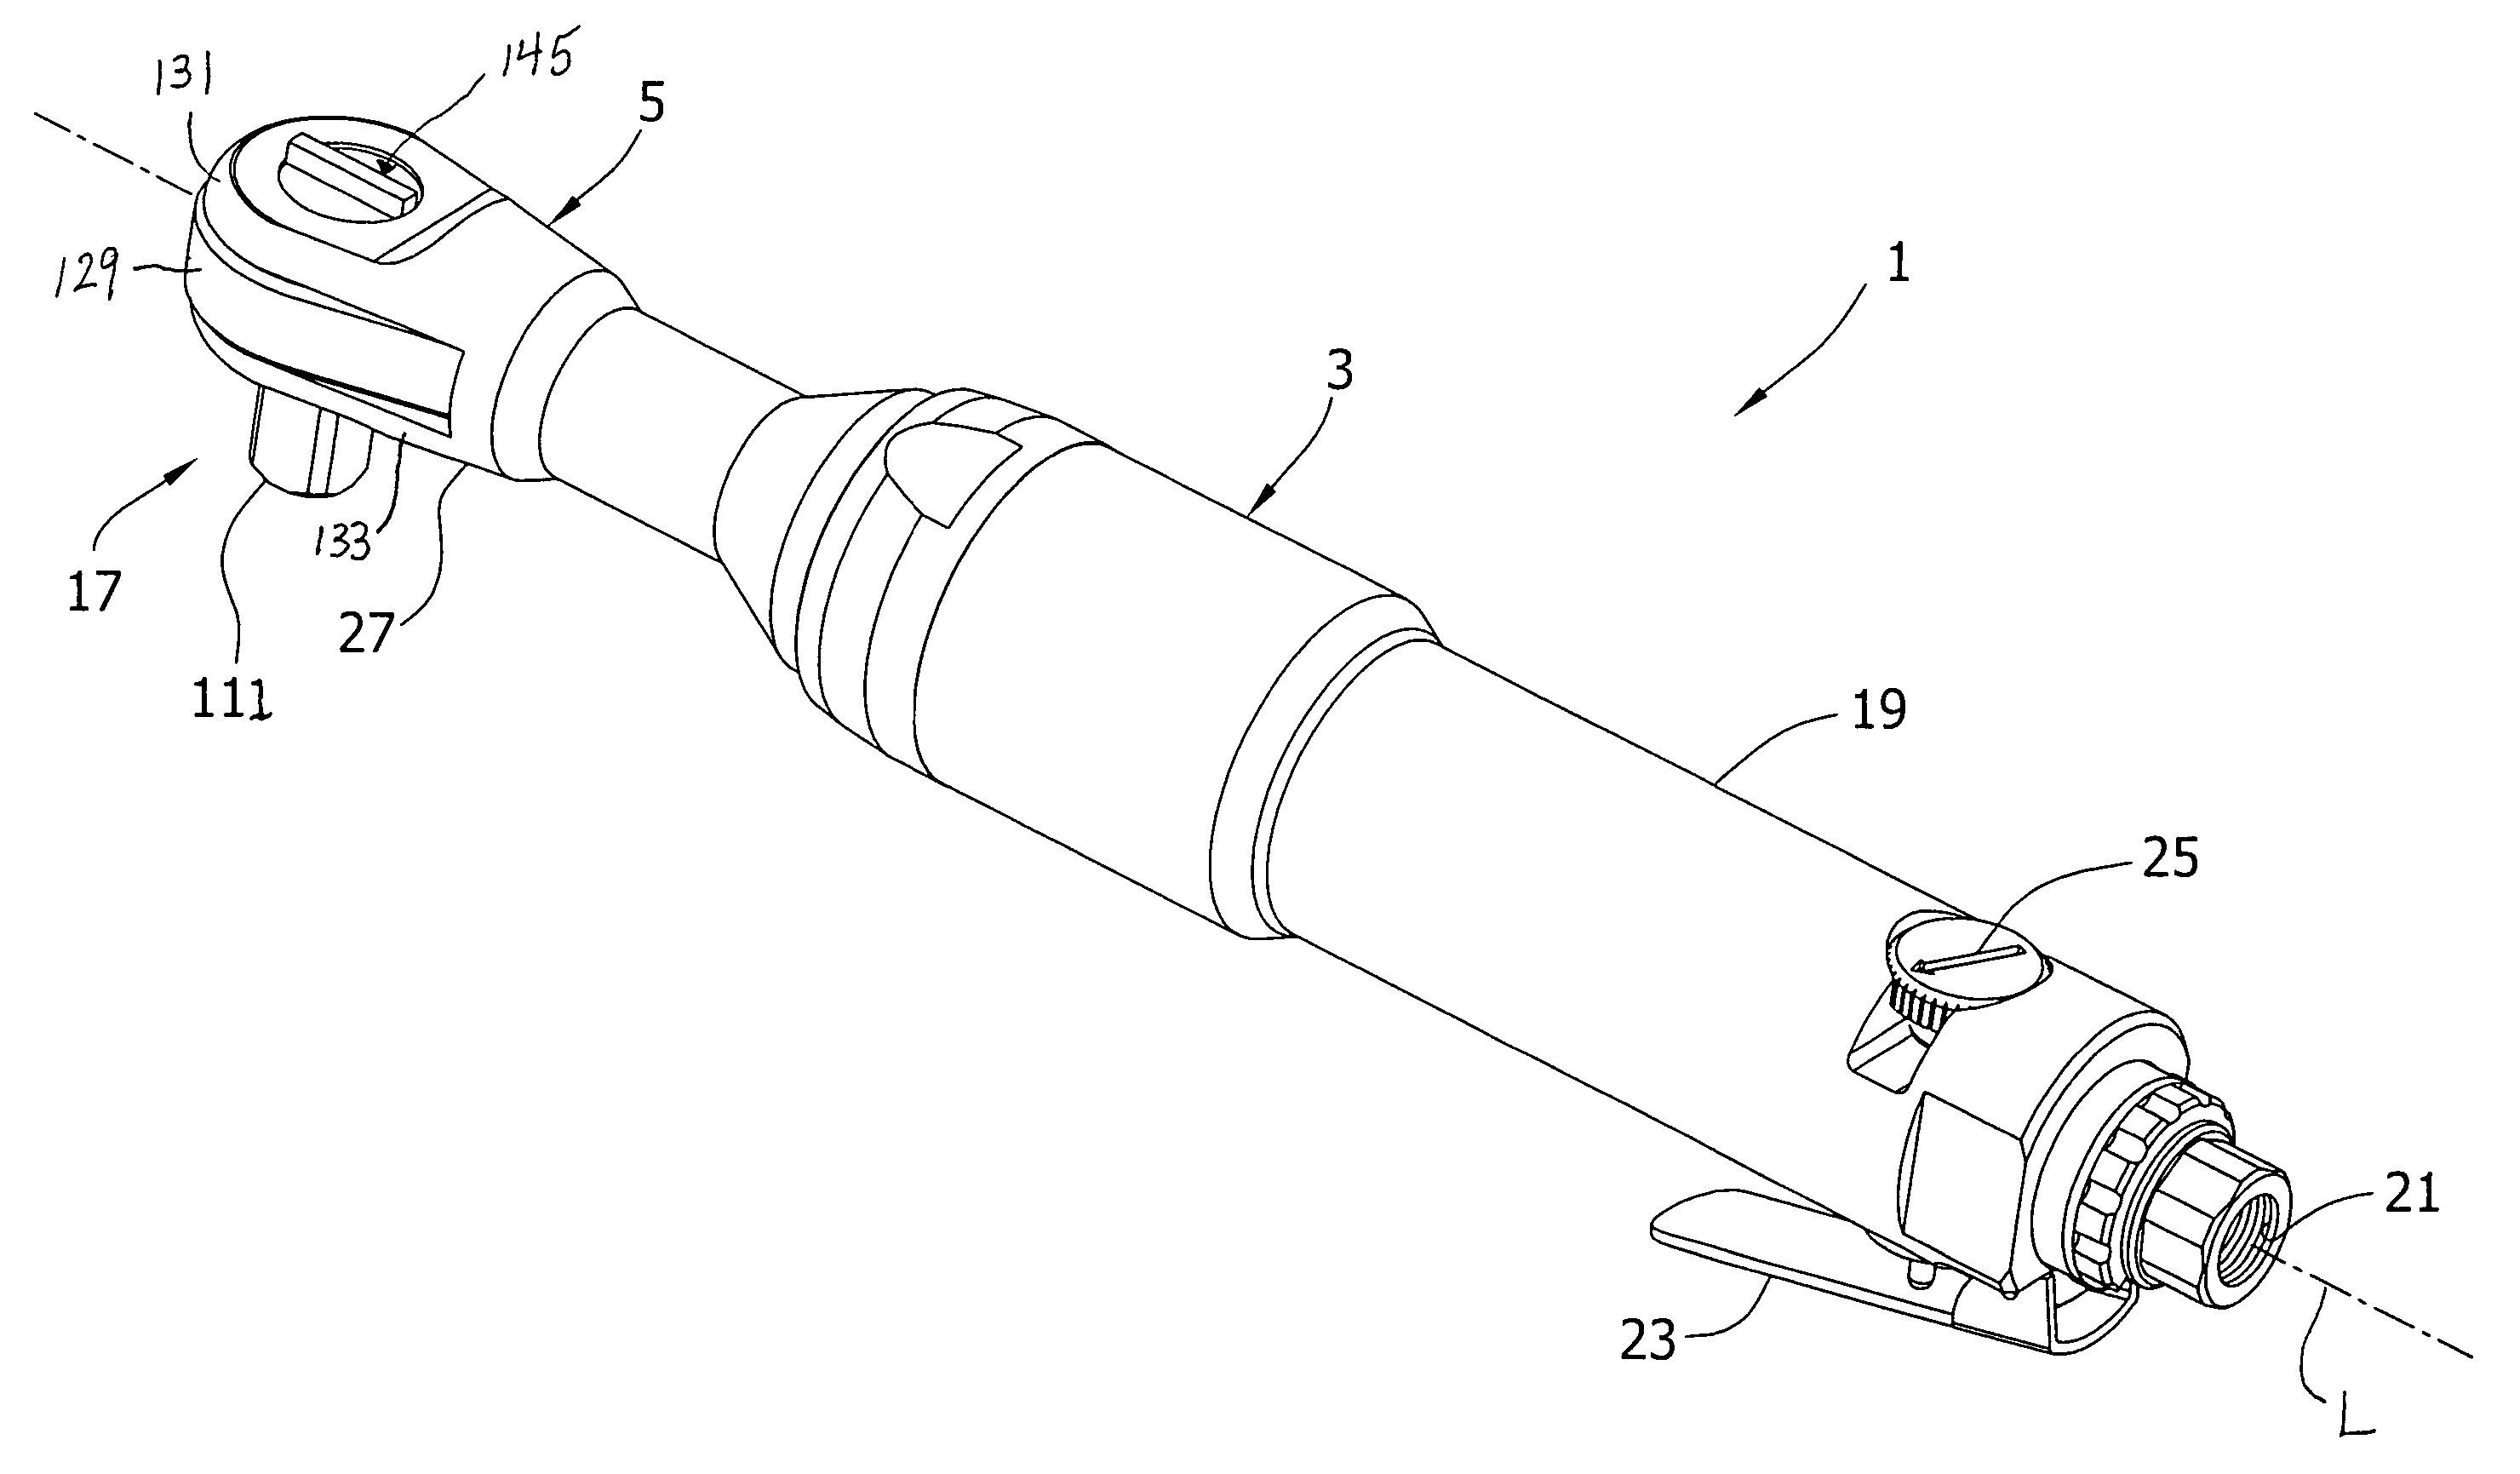 Hand tool with impact drive and speed reducing mechanism